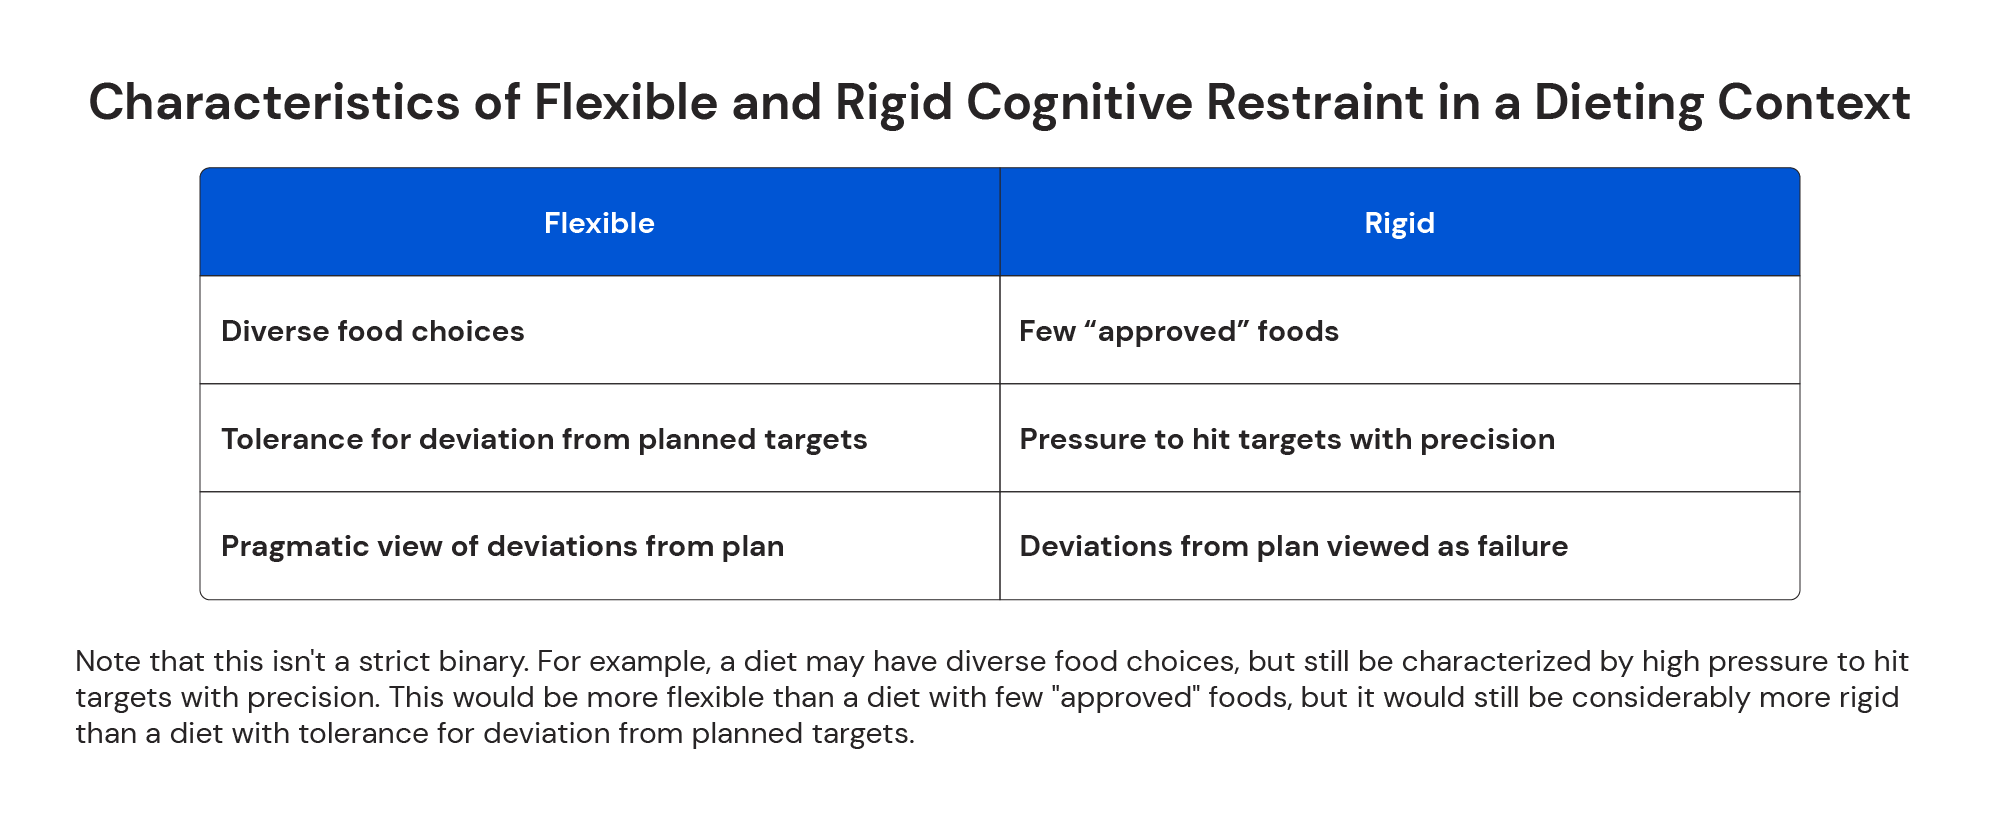 Characteristics of flexible and rigid cognitive restraint in a dieting context